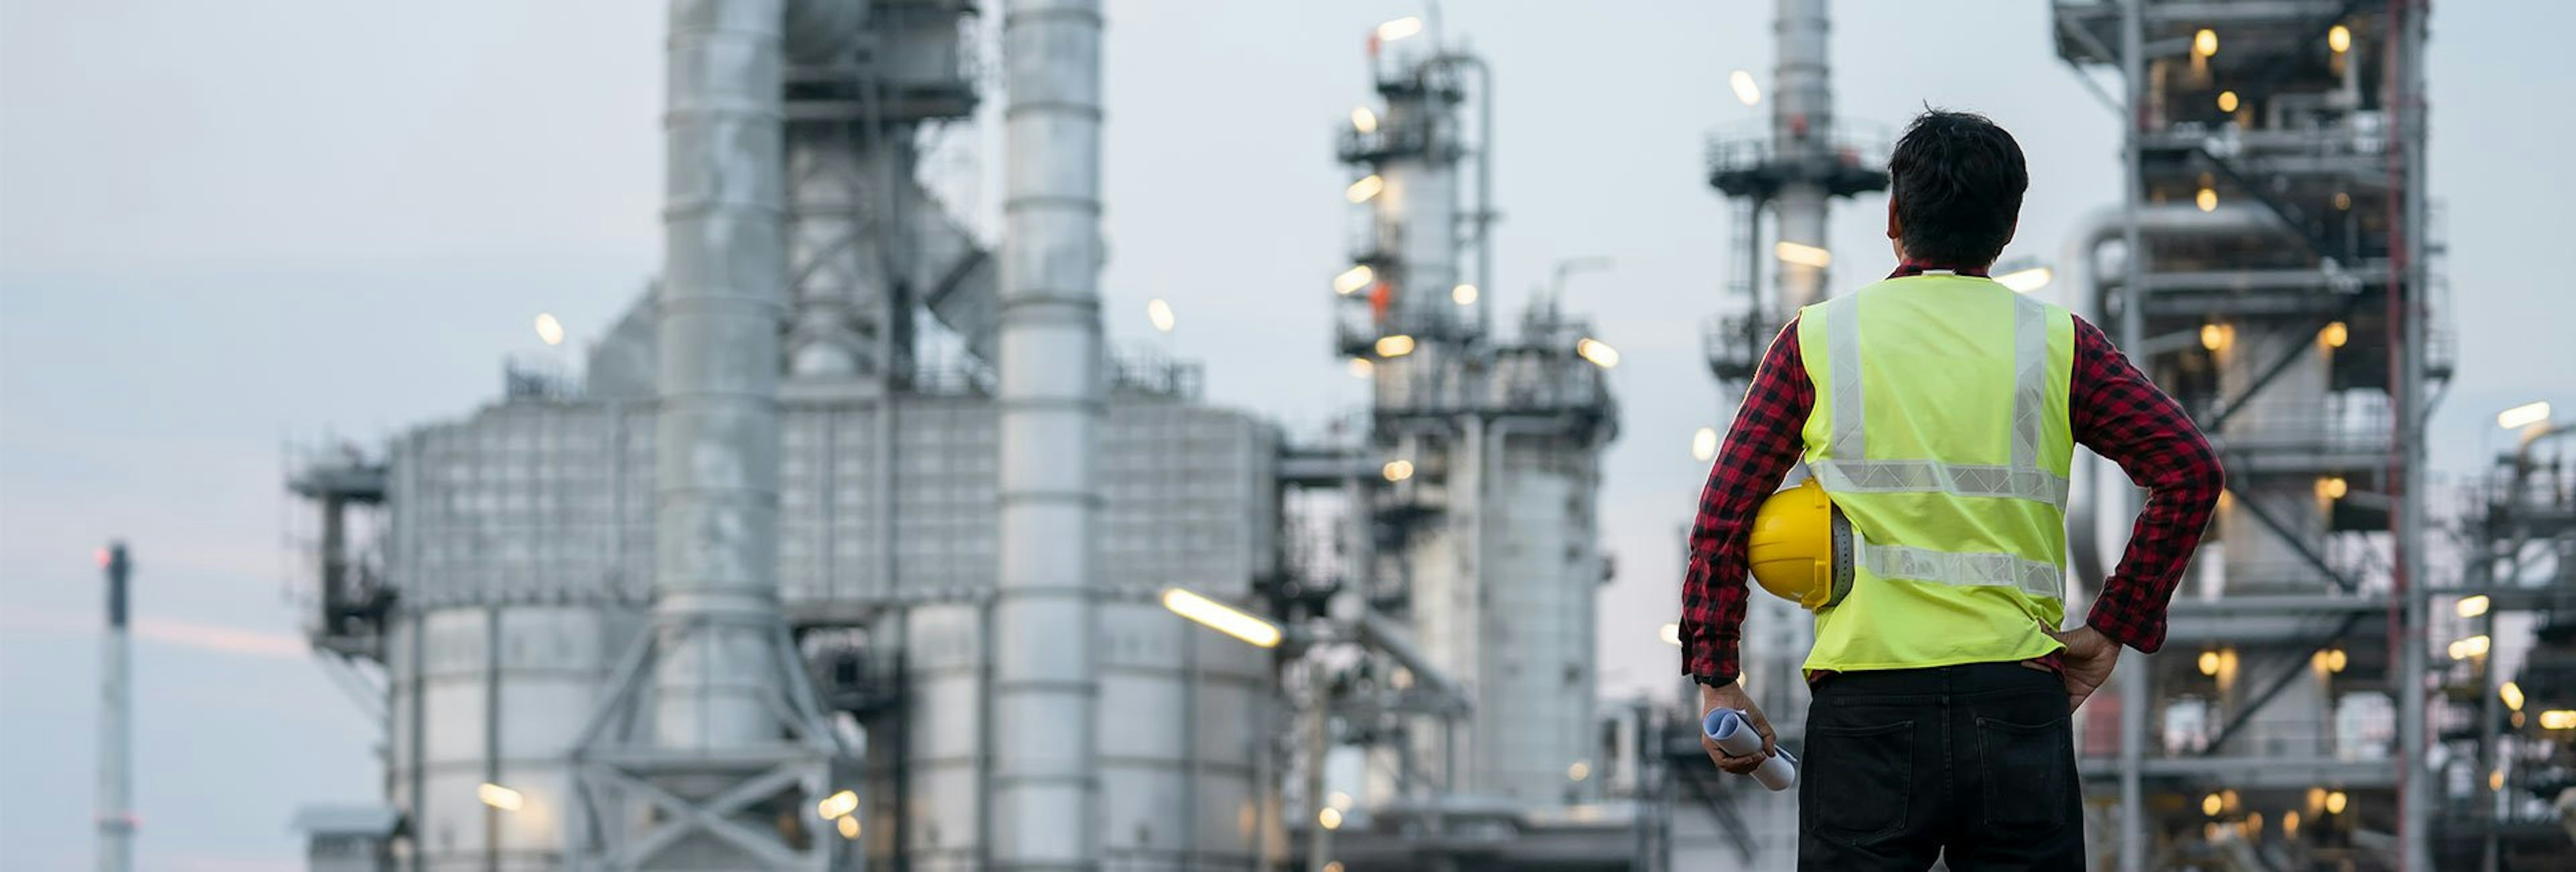 Man standing in front of oil refinery